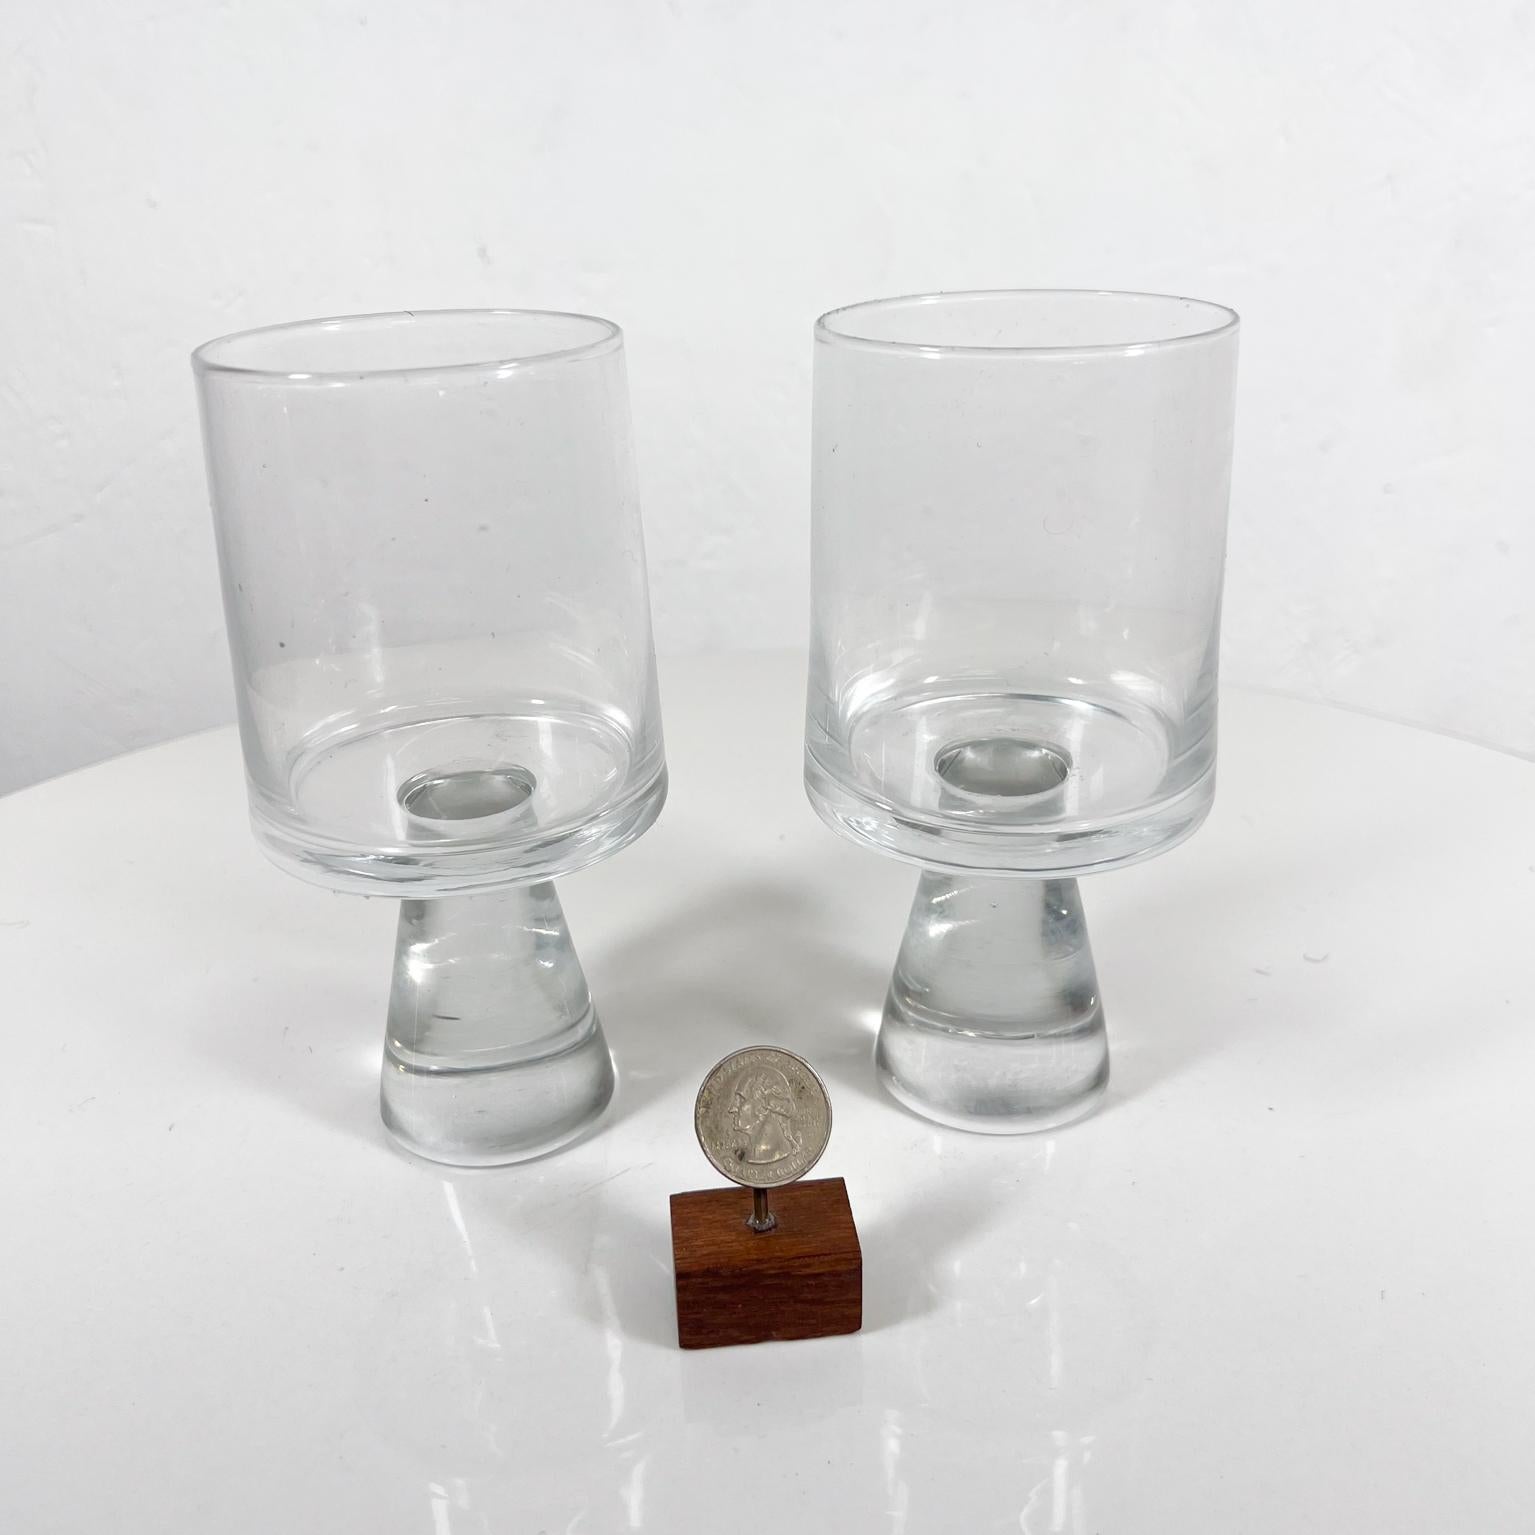 1970s Mod Set of Two Water Goblet Crystal Glasses Thick Stem
Vintage Antique Crystal Cut Beautiful Design Glass Water Goblet Tumbler
3 diameter x 6 h
Preowned vintage, please see images.


